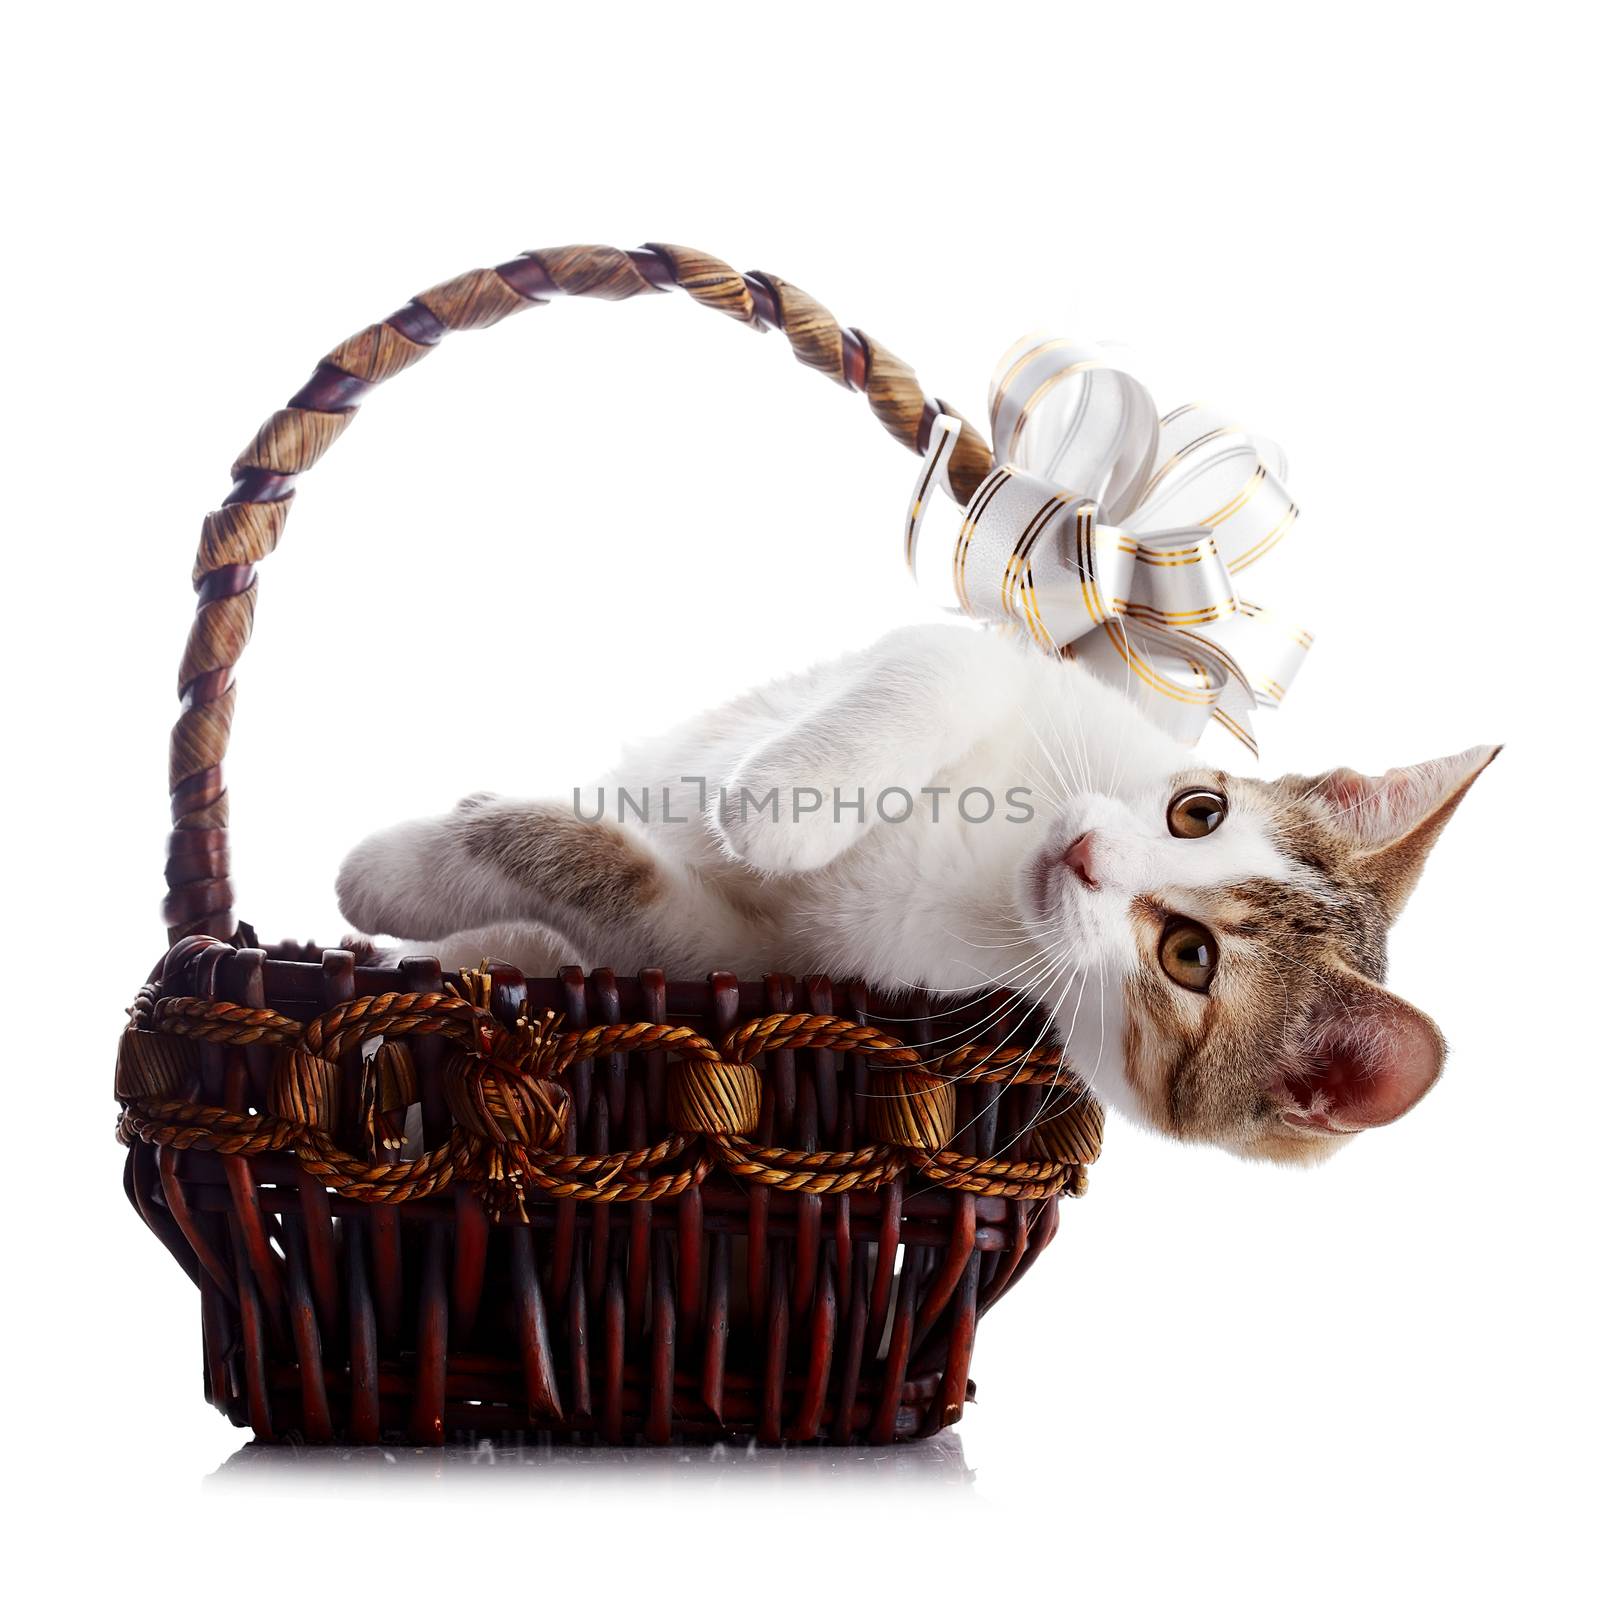 Kitten in a basket with a bow. Multi-colored small kitten. Kitten on a white background. Small predator. Small cat.